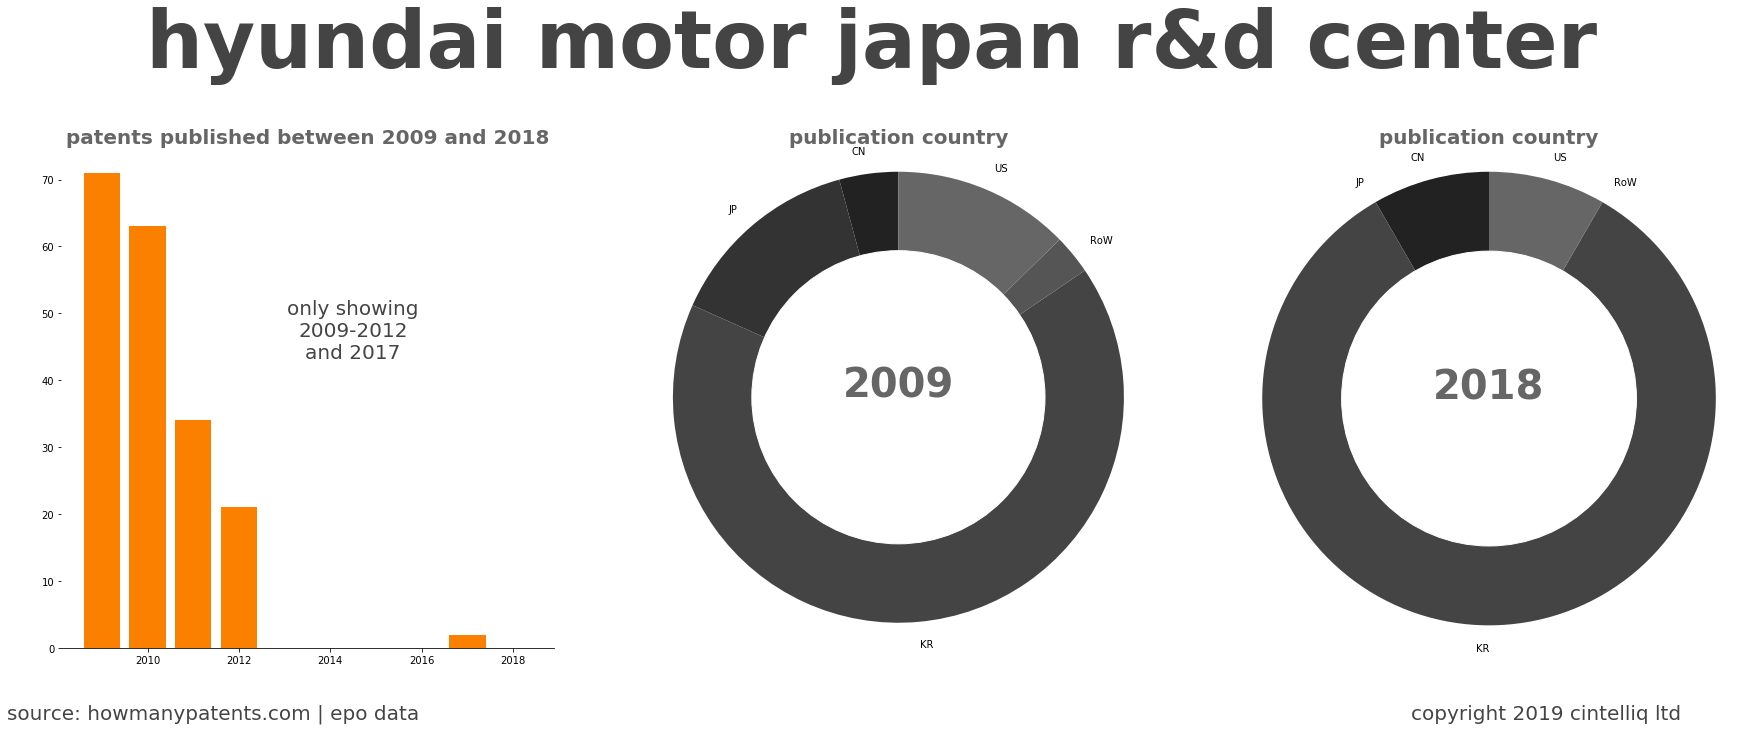 summary of patents for Hyundai Motor Japan R&D Center